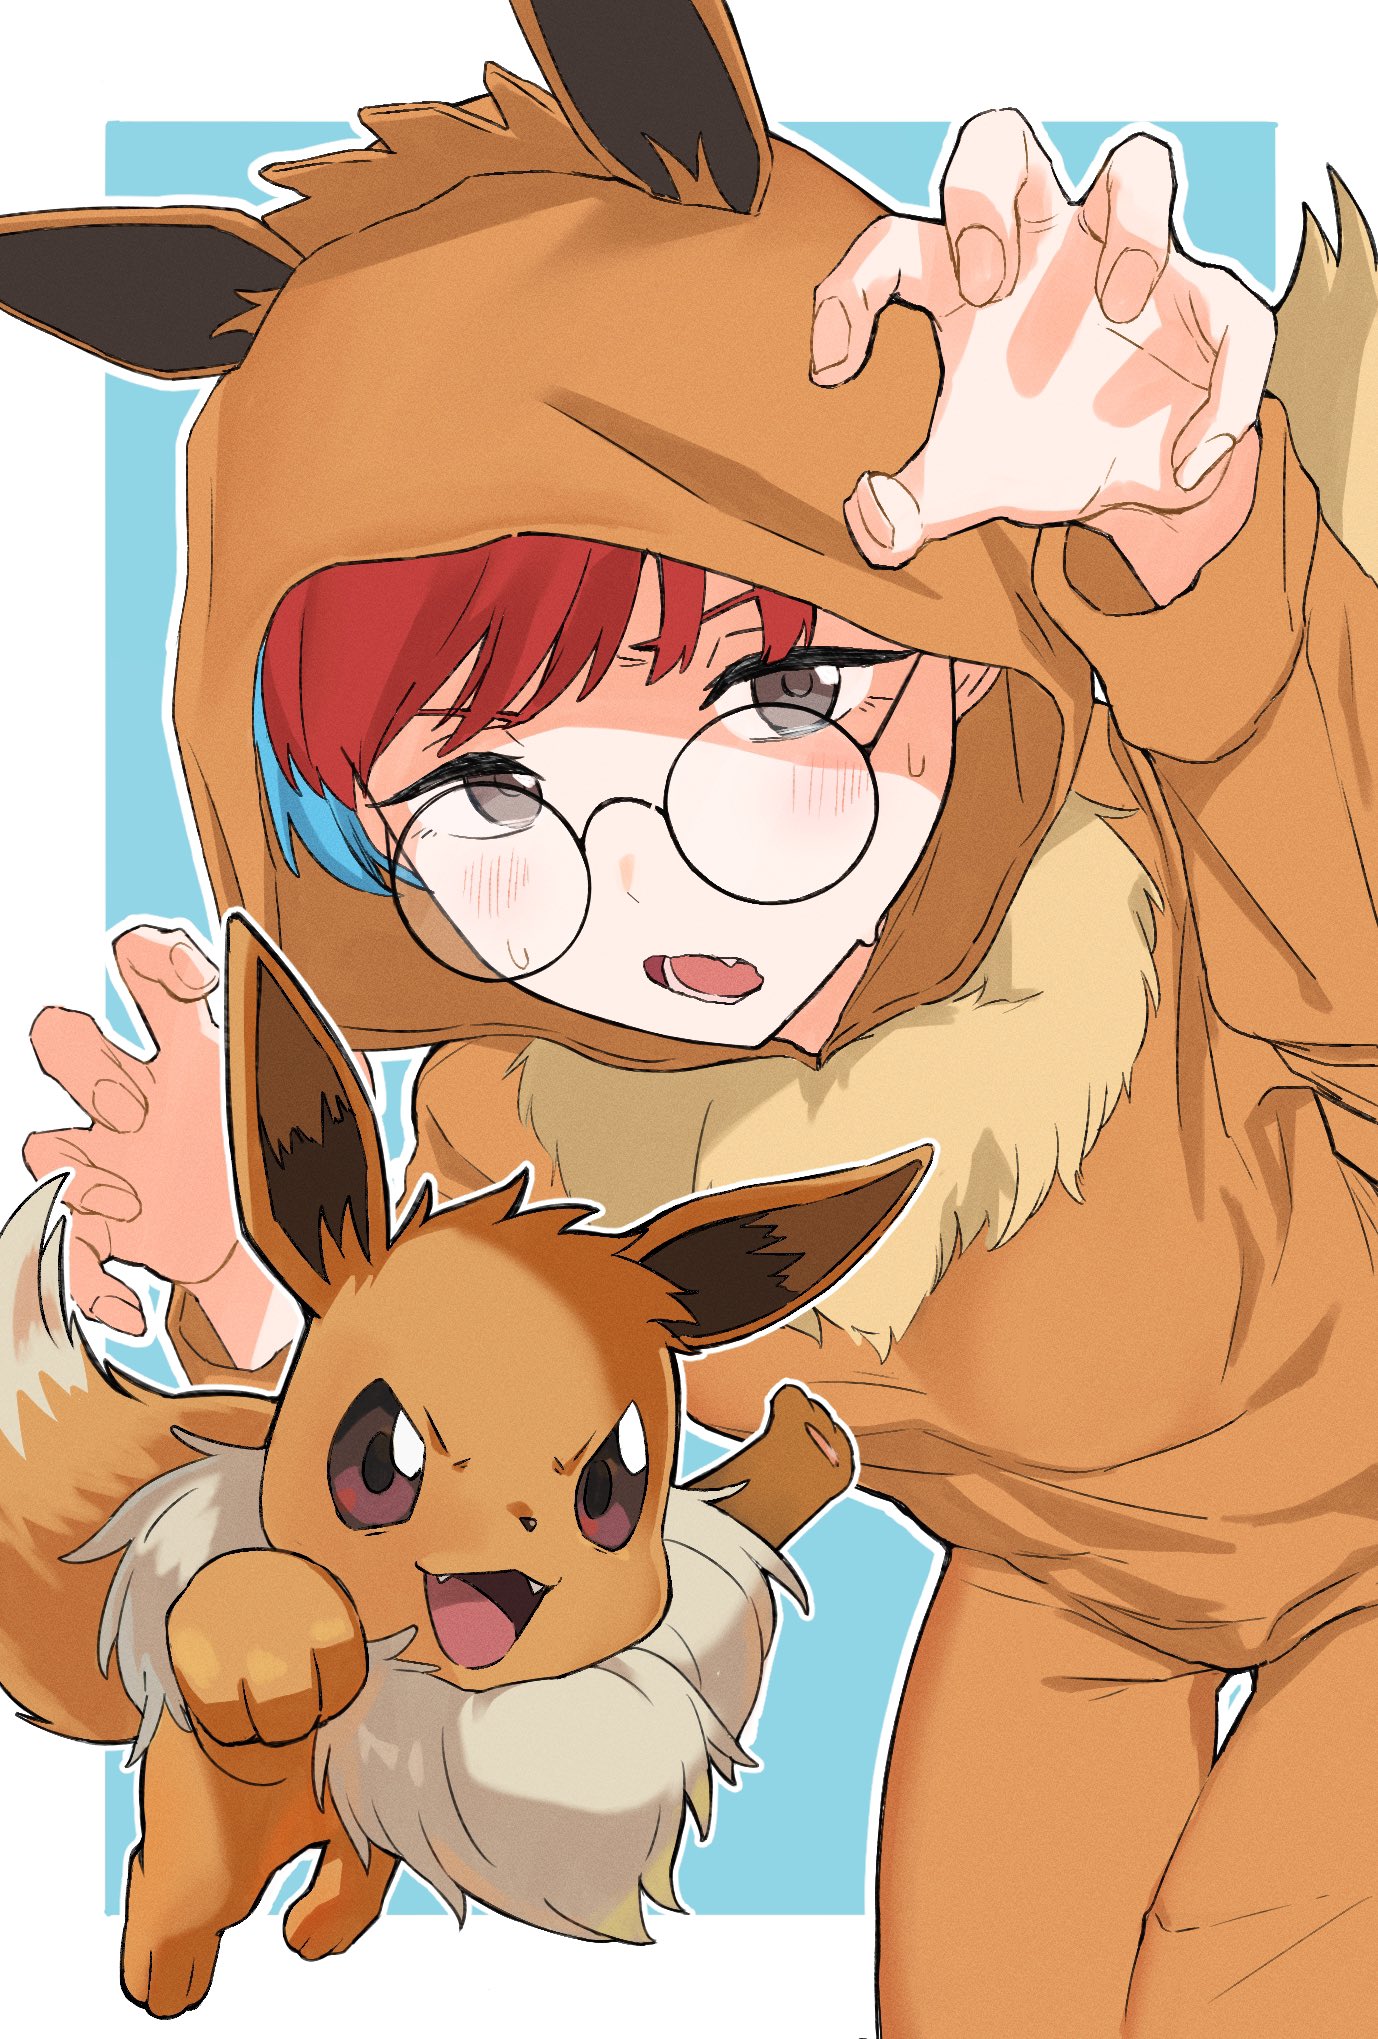 eevee, penny, and poke kid (pokemon and 1 more) drawn by sixstingrays